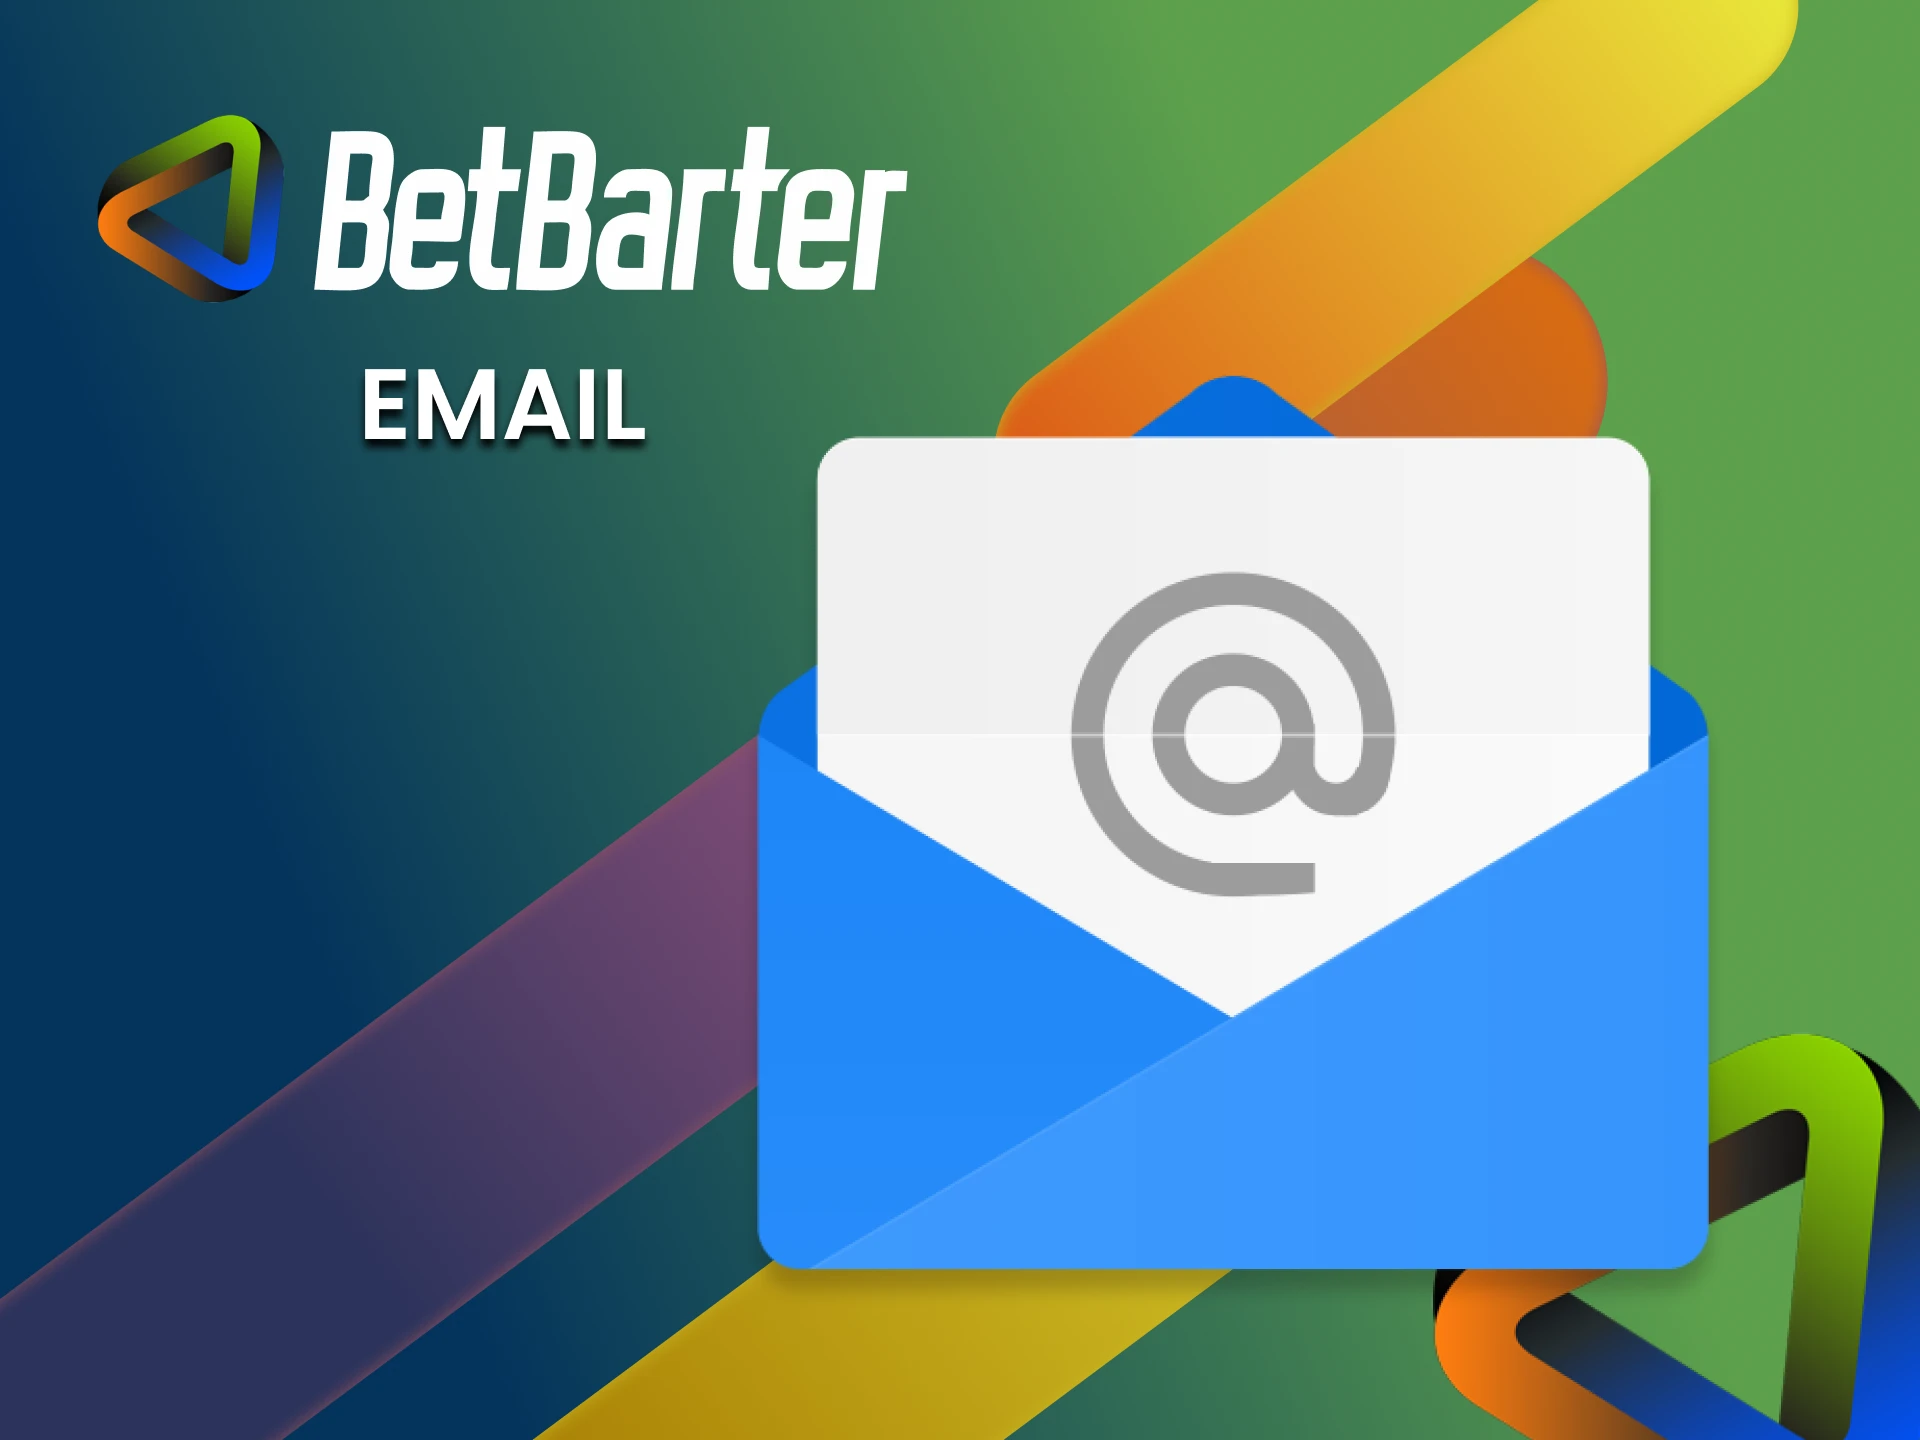 You can contact the BetBarter team via email.